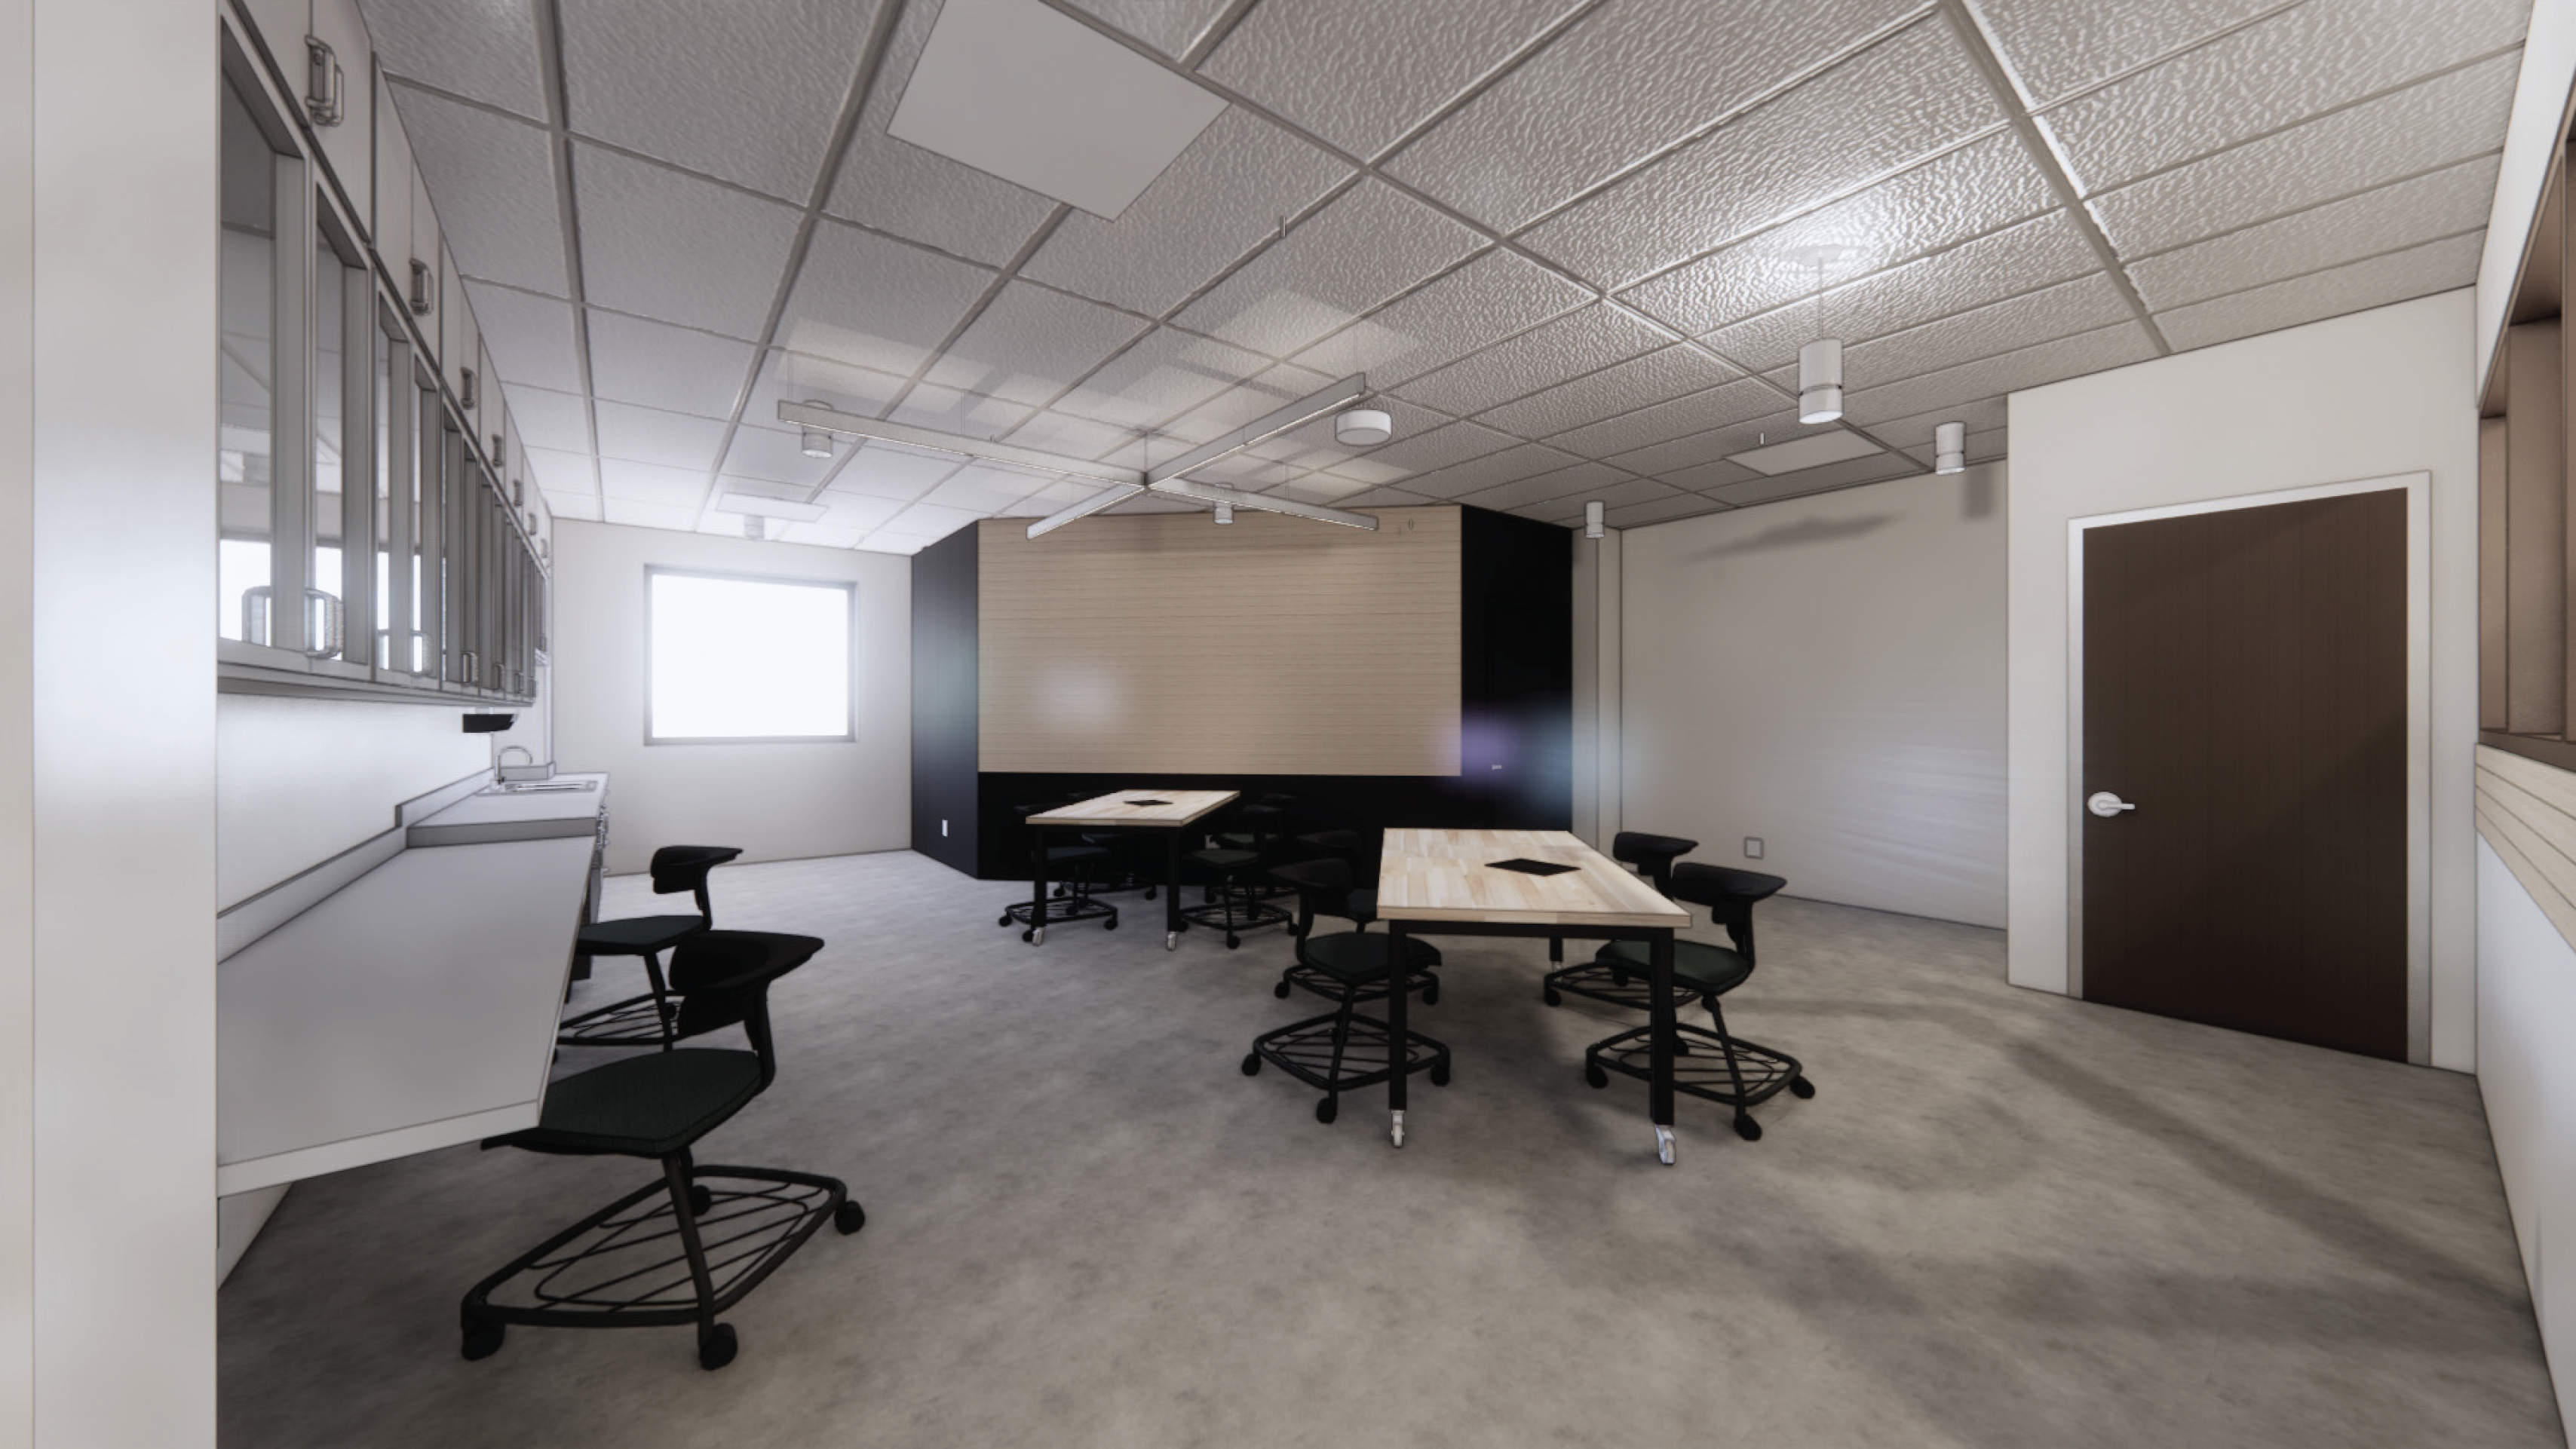 Rendering of the Maker Space Renovation